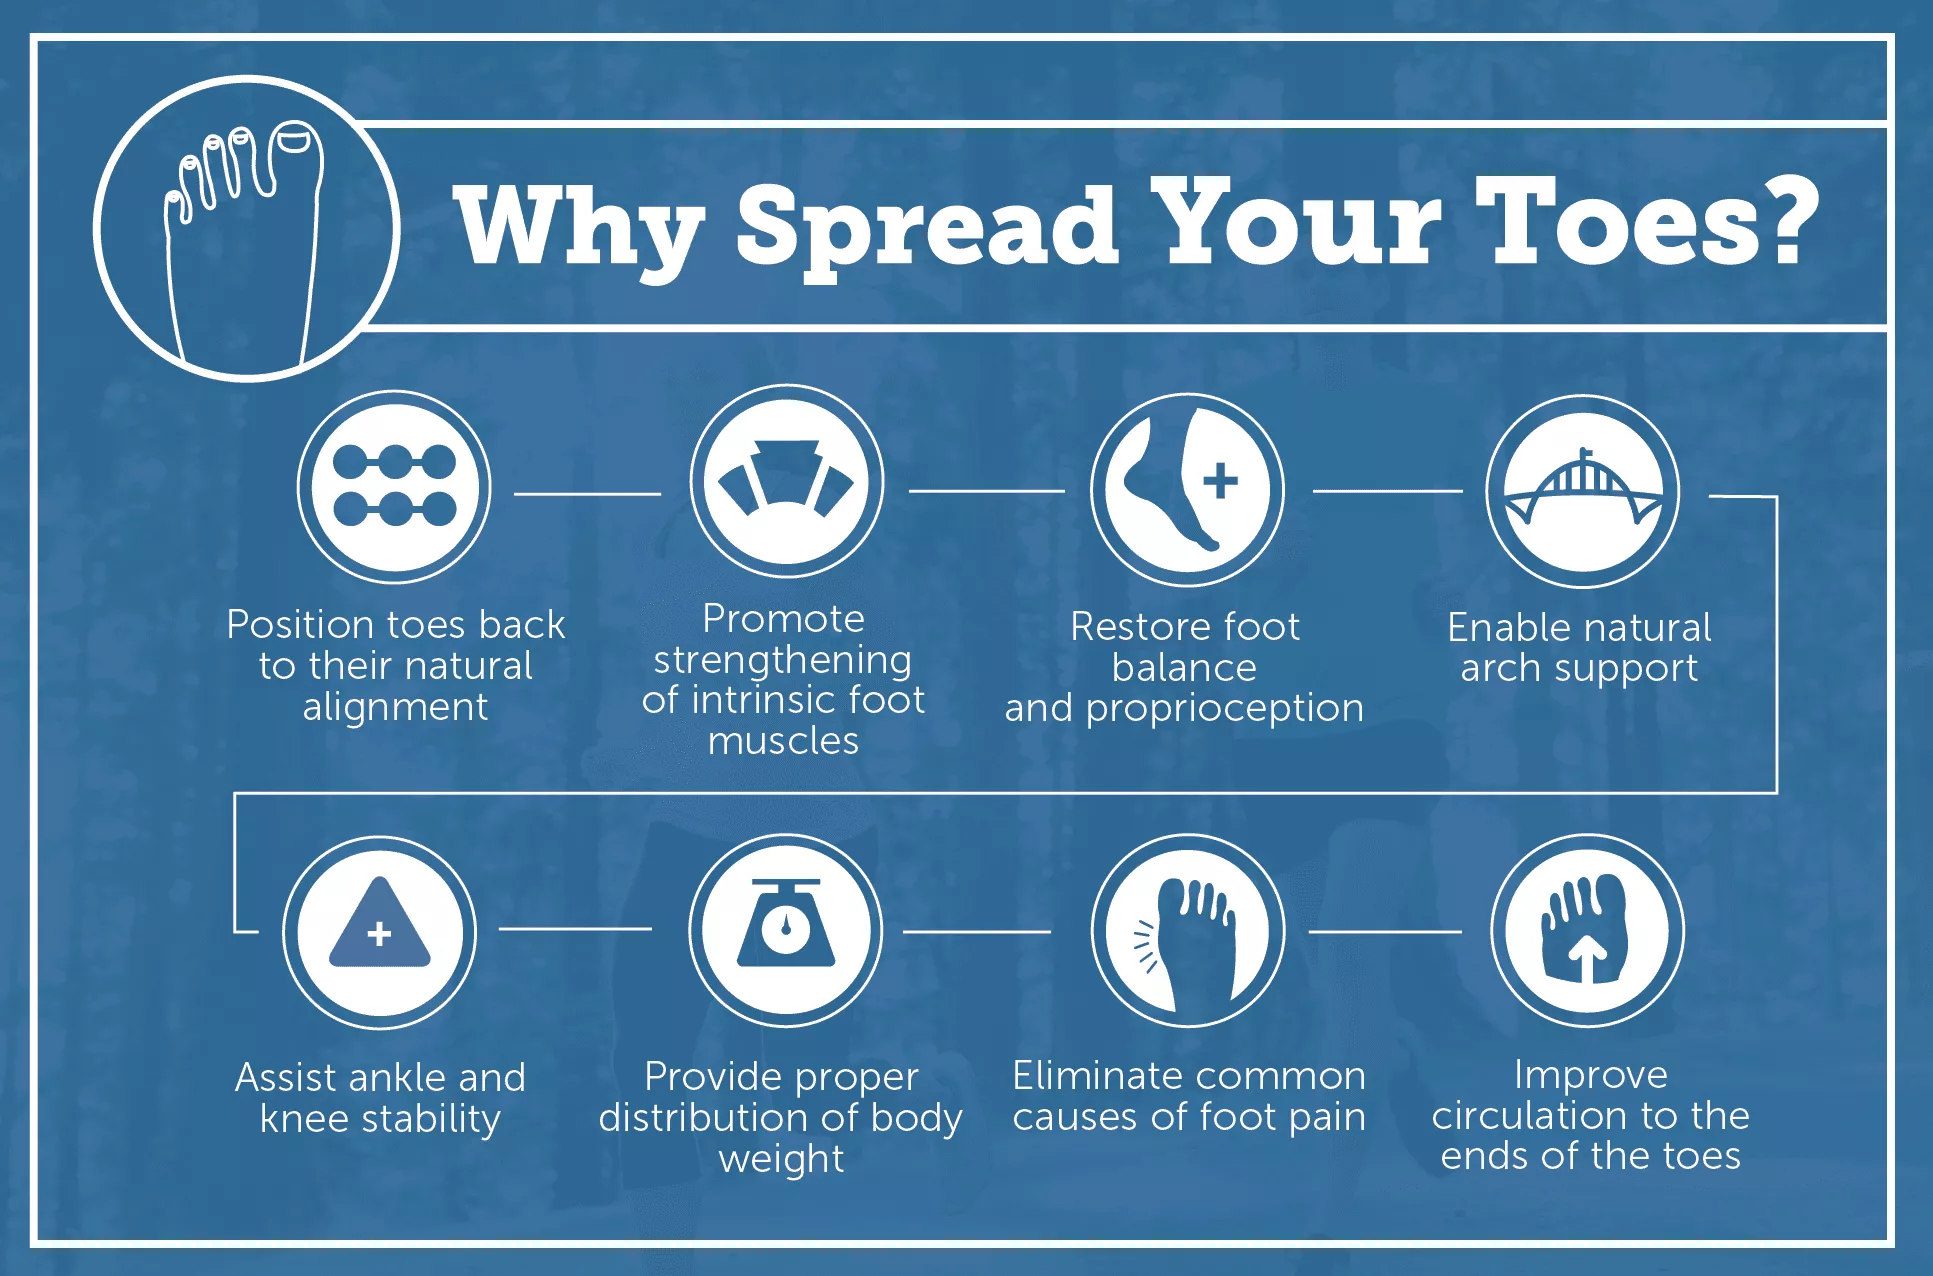 Why Spread Your Toes - Correct Toes Benefits